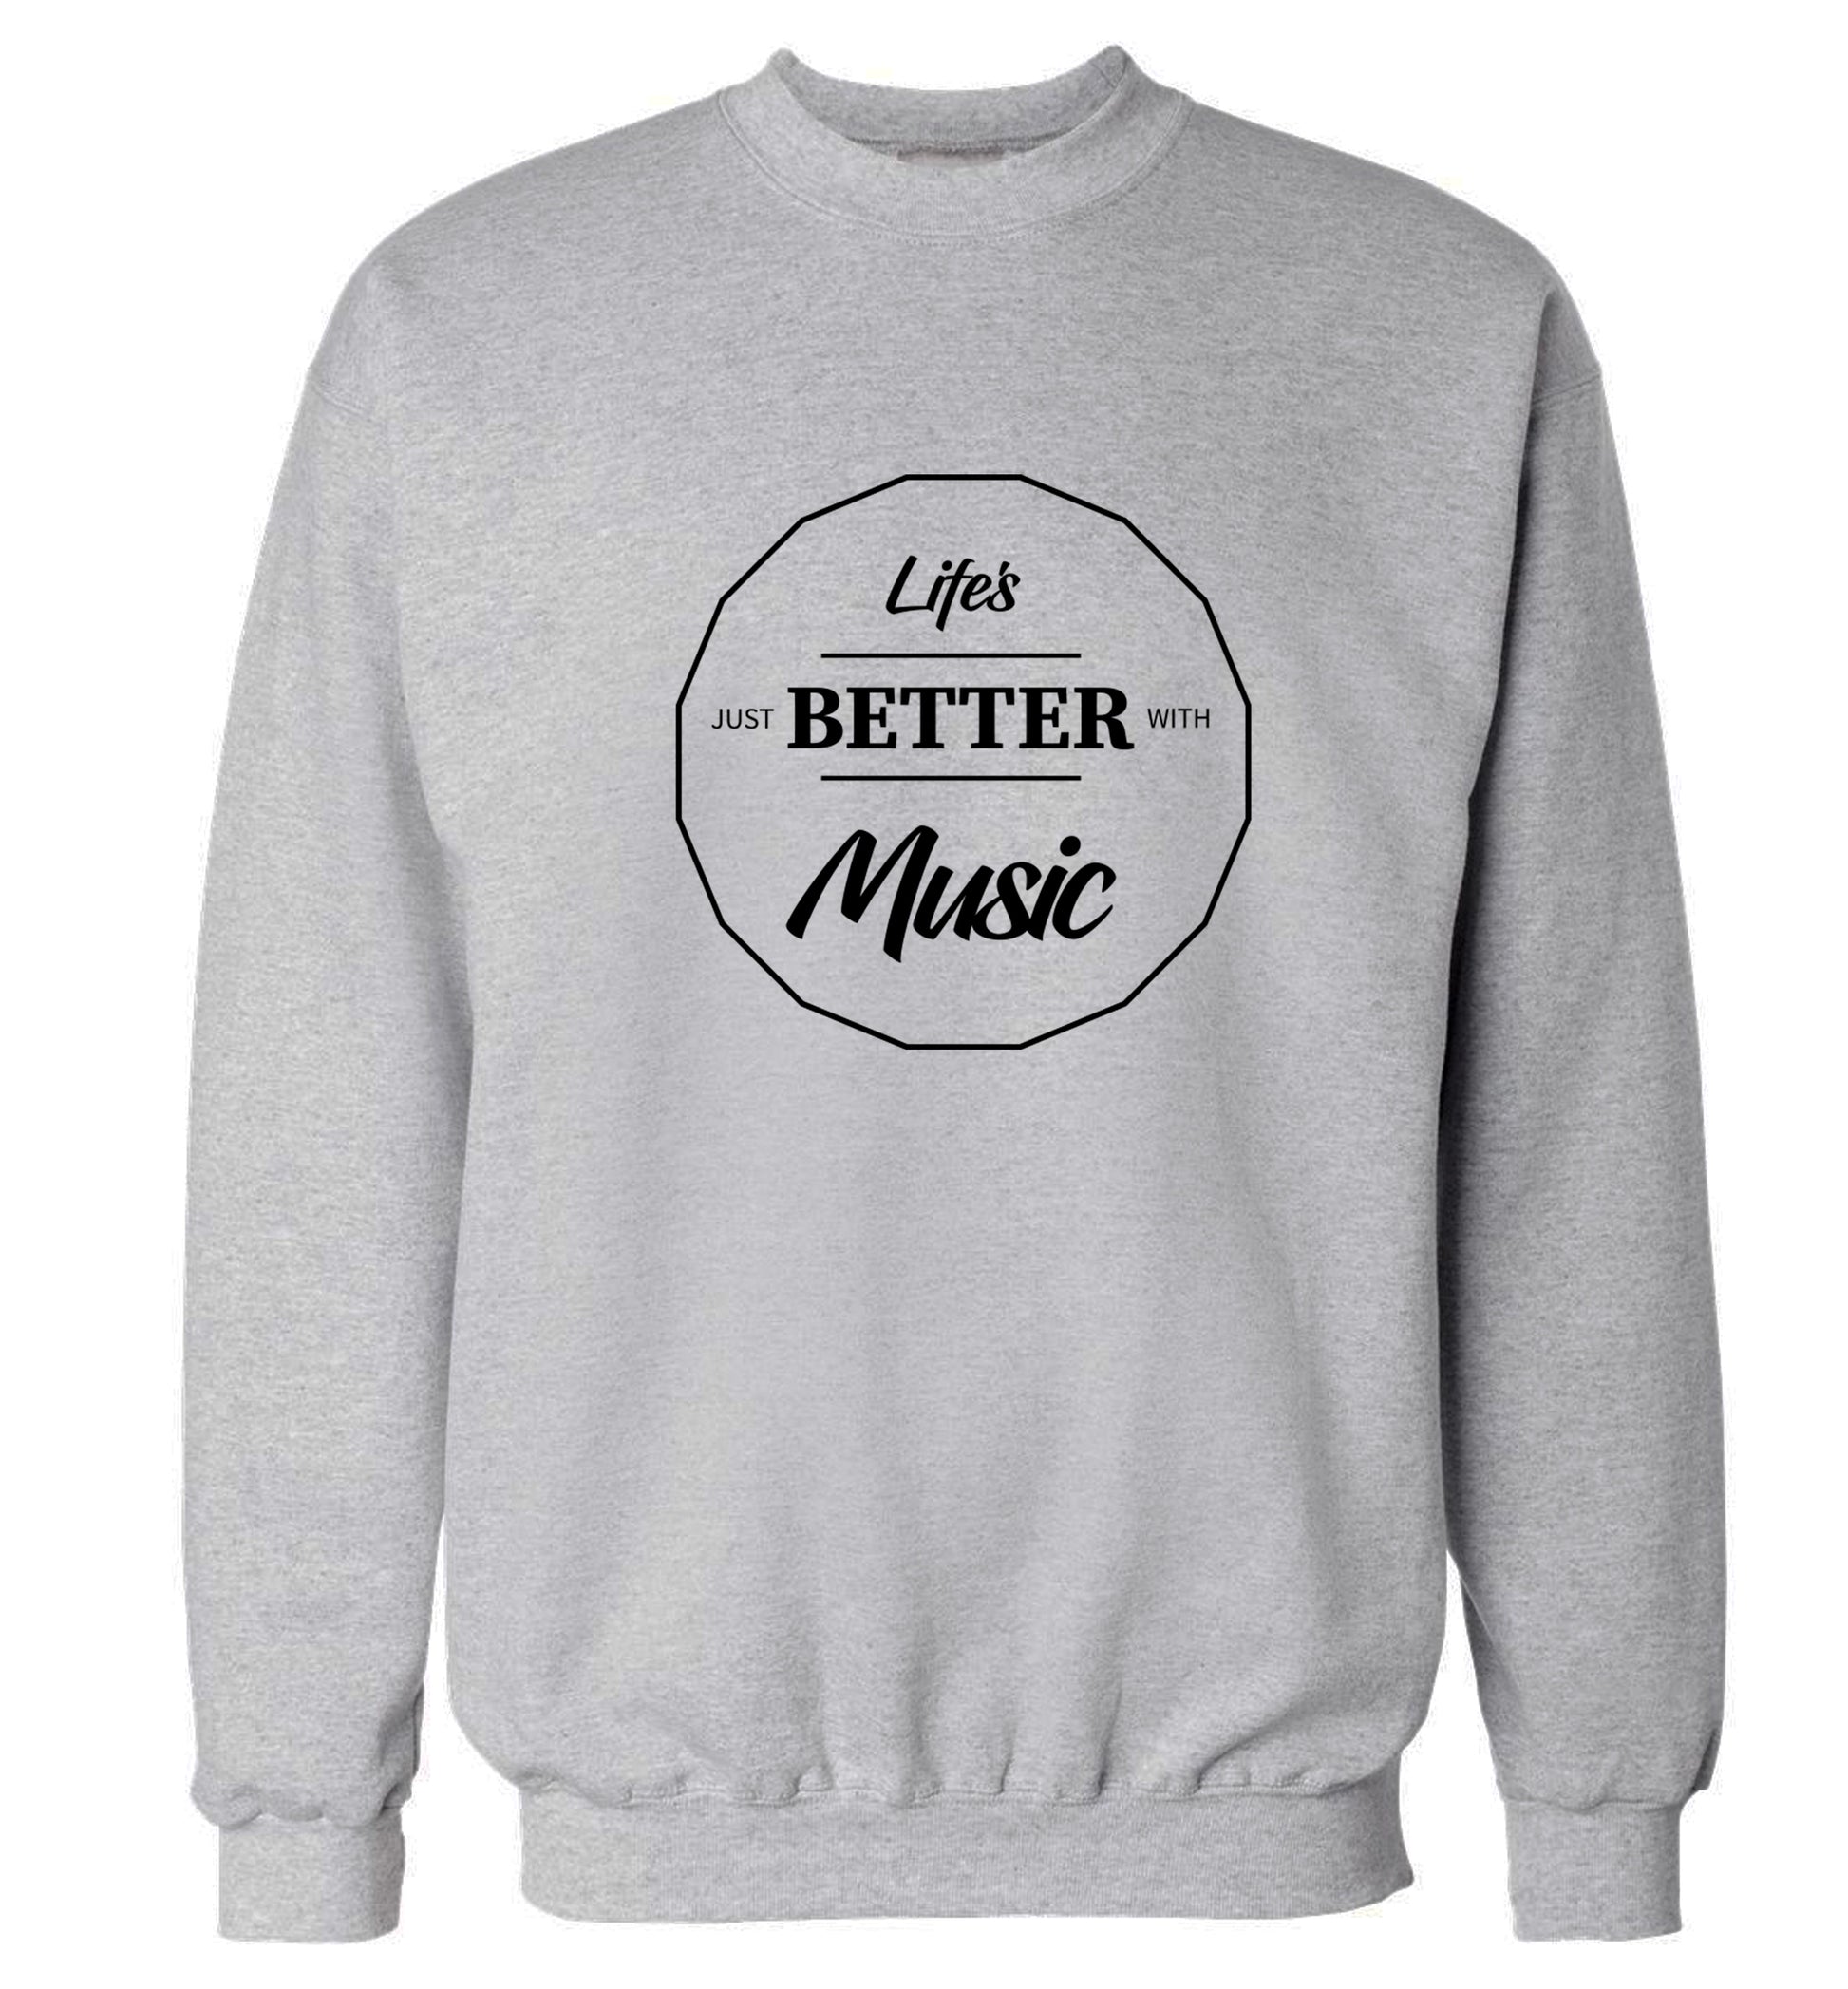 Life is Better With Music Adult's unisex grey Sweater 2XL